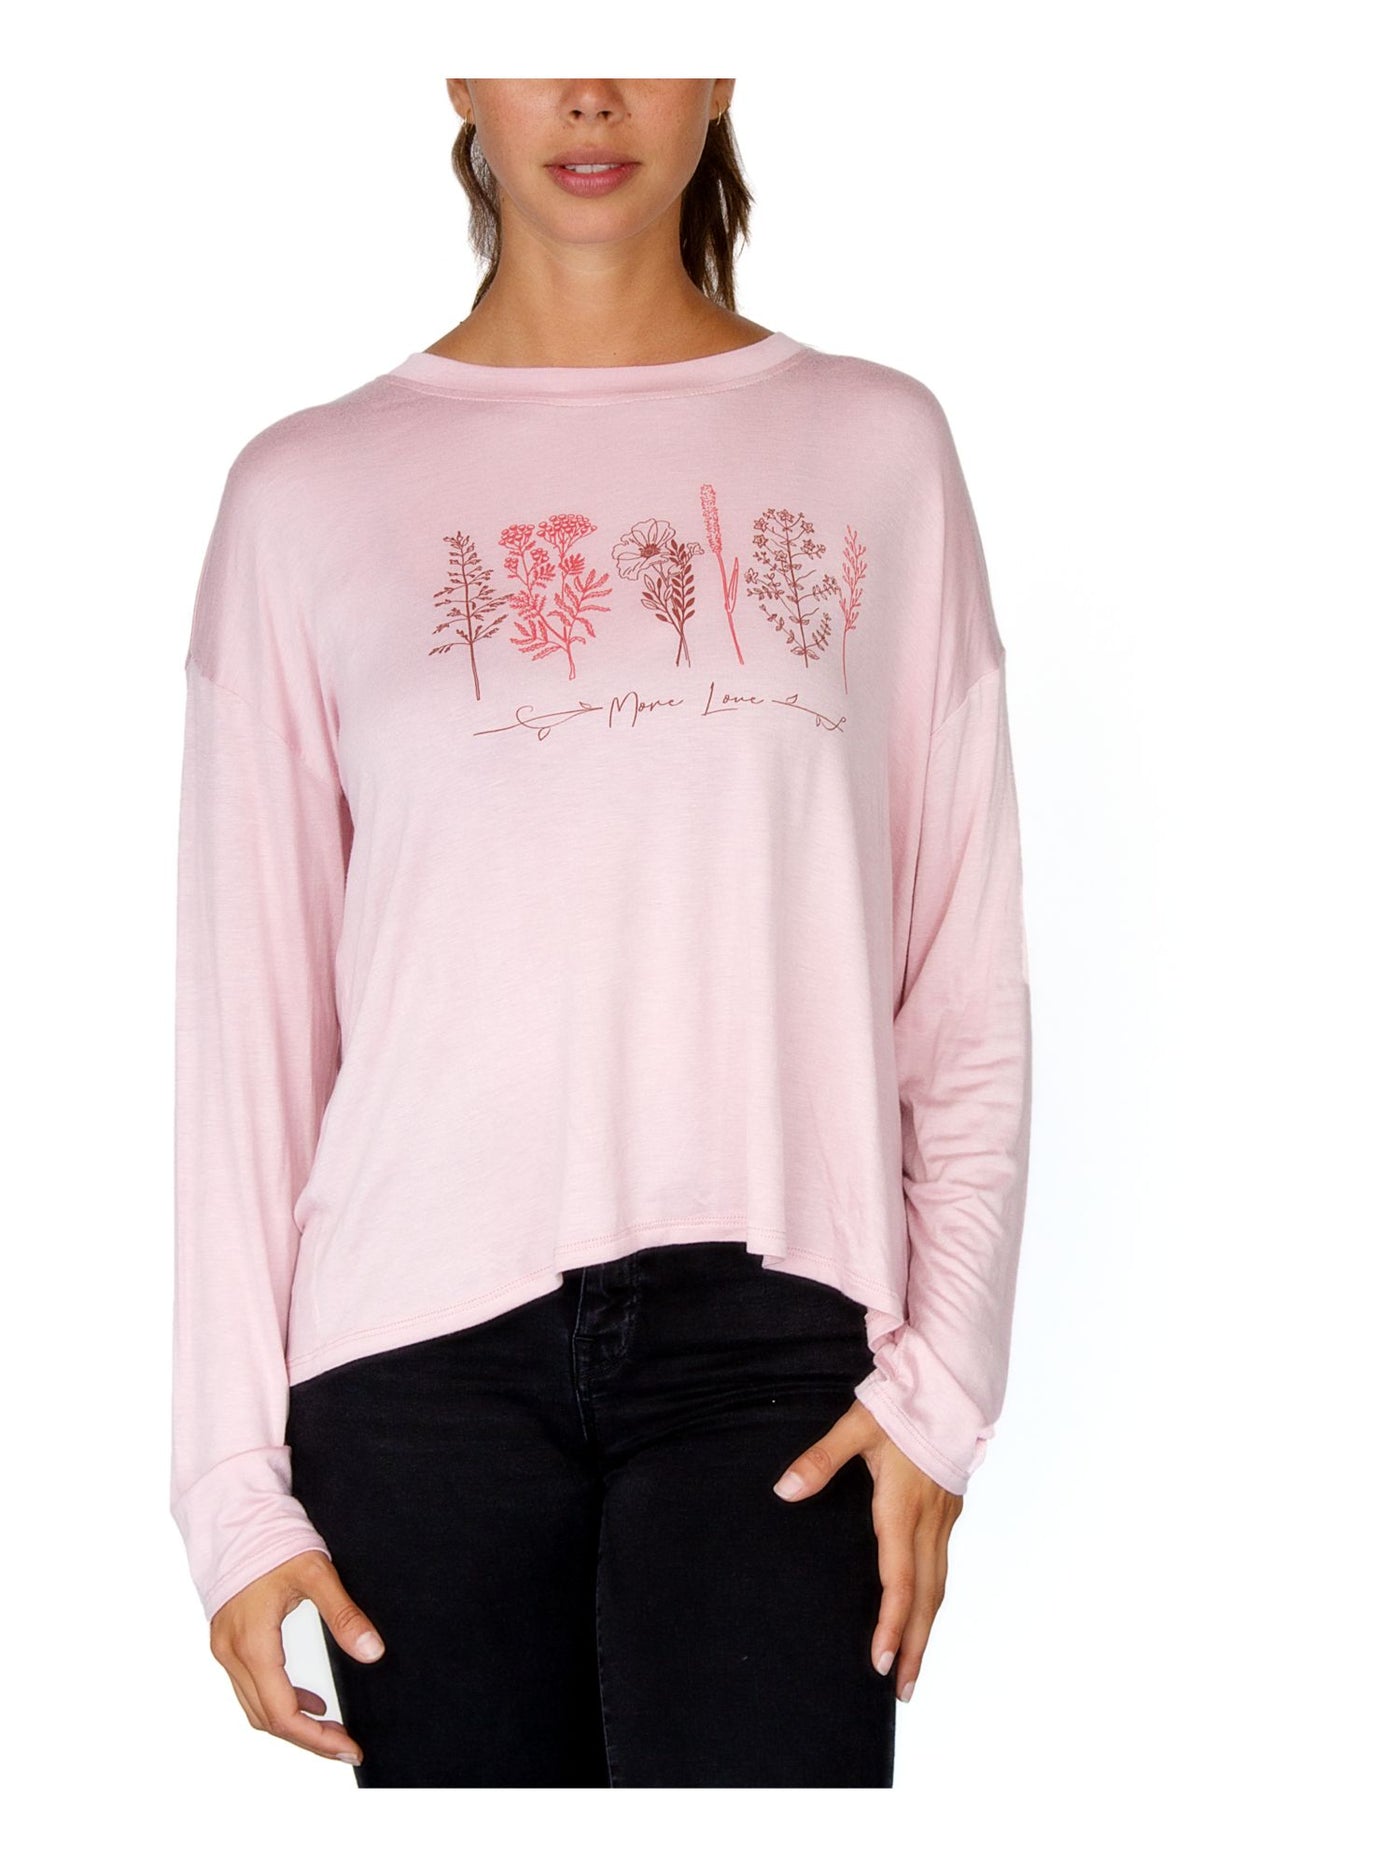 REBELLIOUS ONE Womens Pink Stretch Short Length Graphic Long Sleeve Crew Neck Top Juniors L